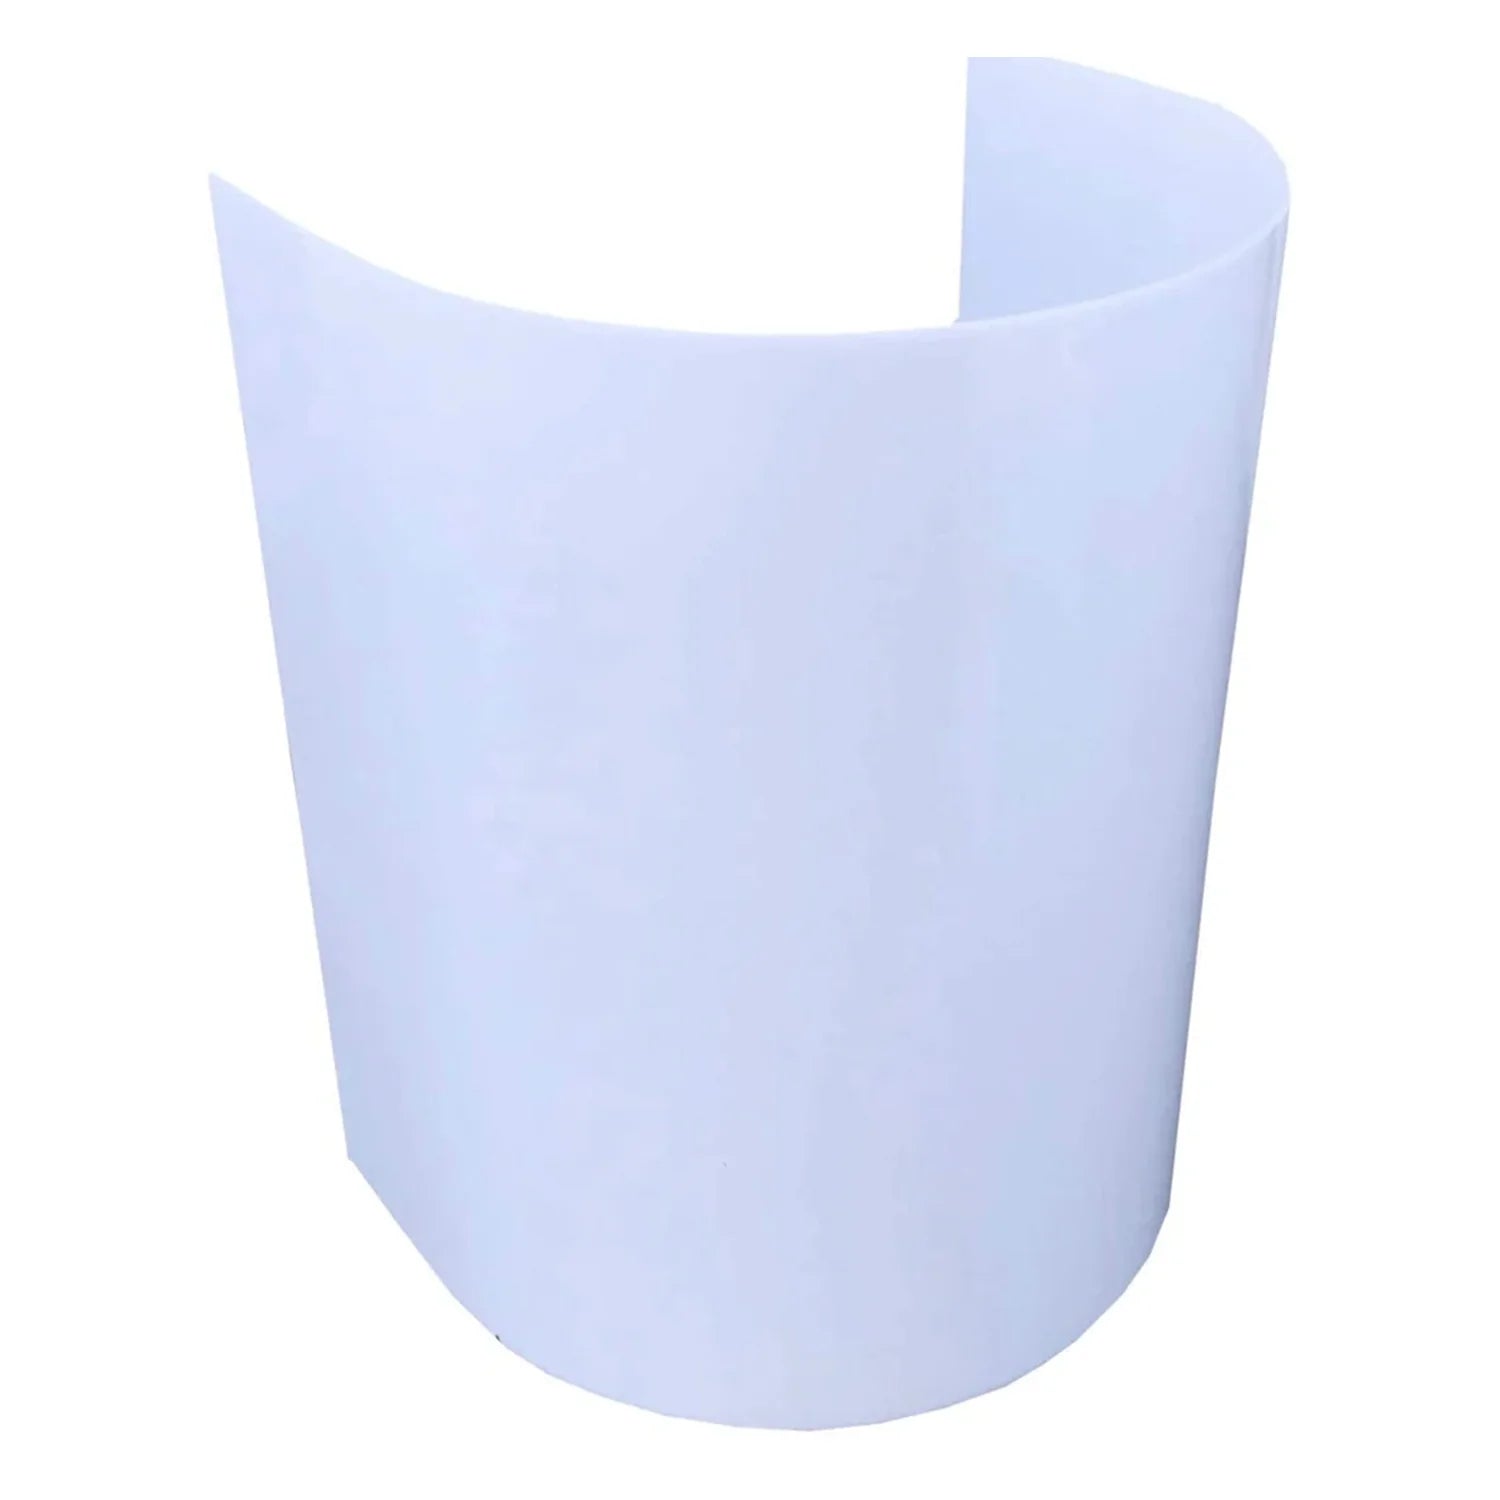 Round Uplight Decor Cover Shield Acrylic 15" Tall - (Set Of 20 Pieces, White)